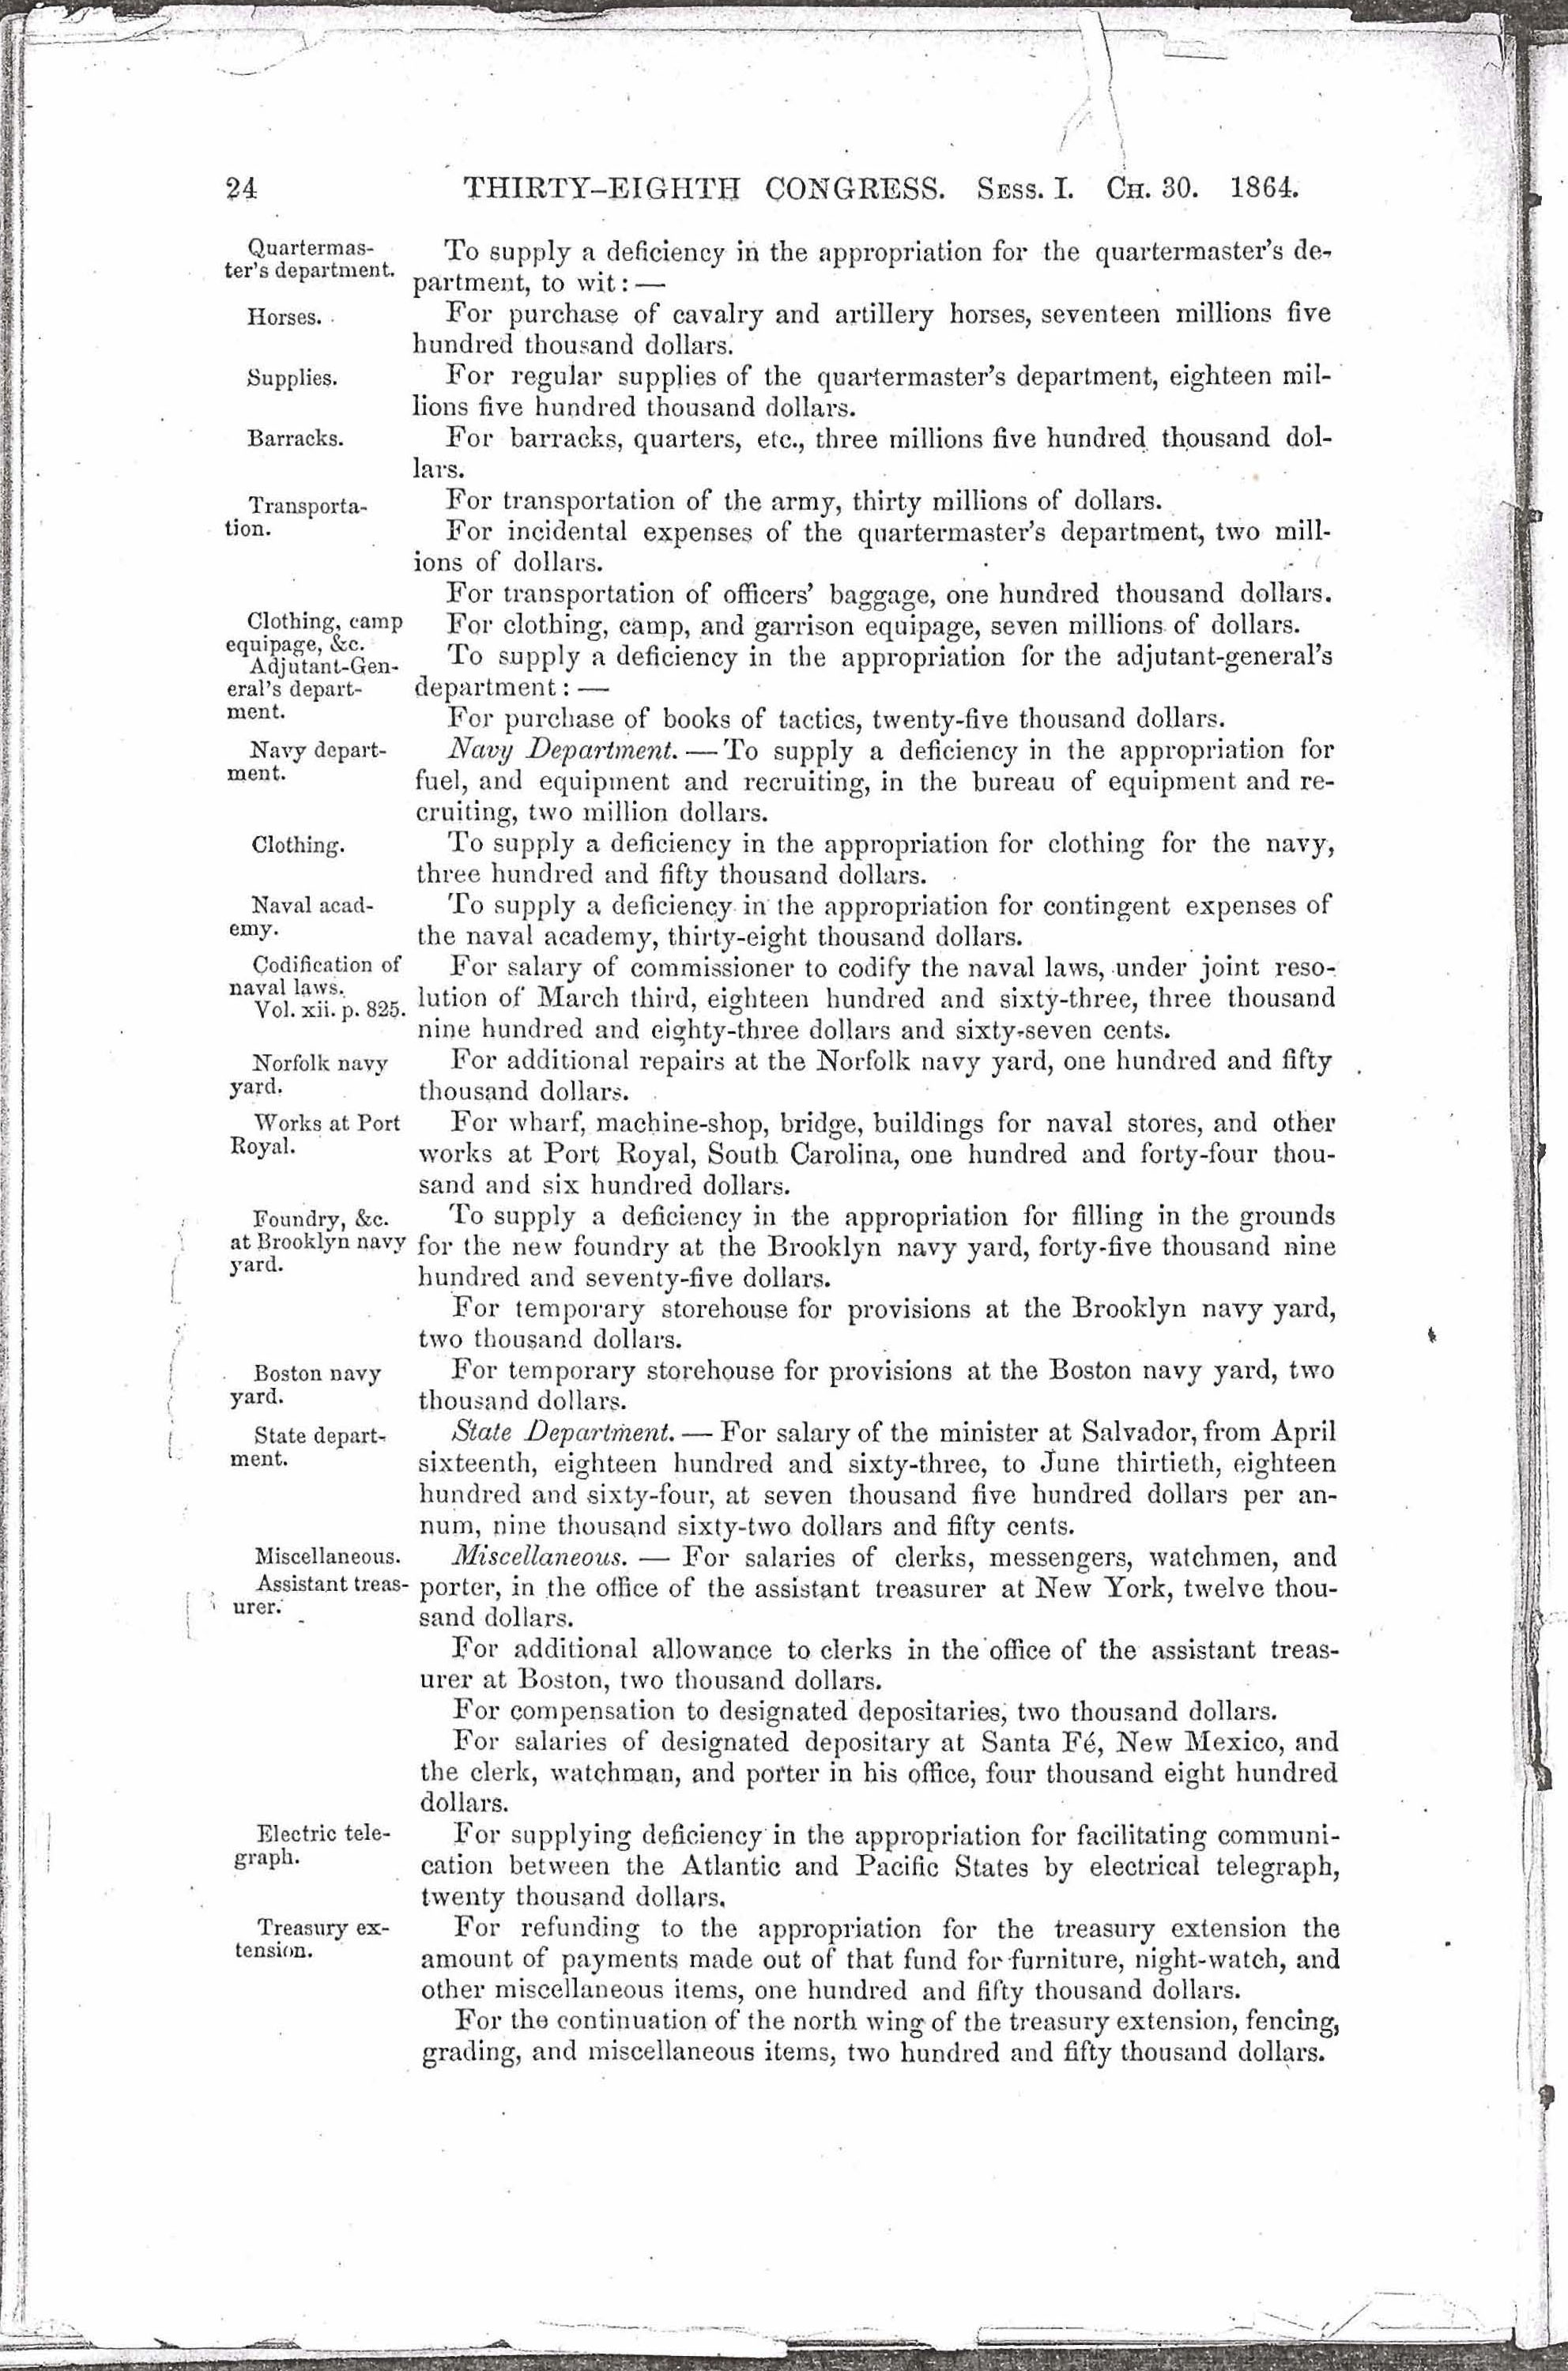 Act of Congress Authorizing Construction of the Washington Naval Hospital, Page 3 of 7